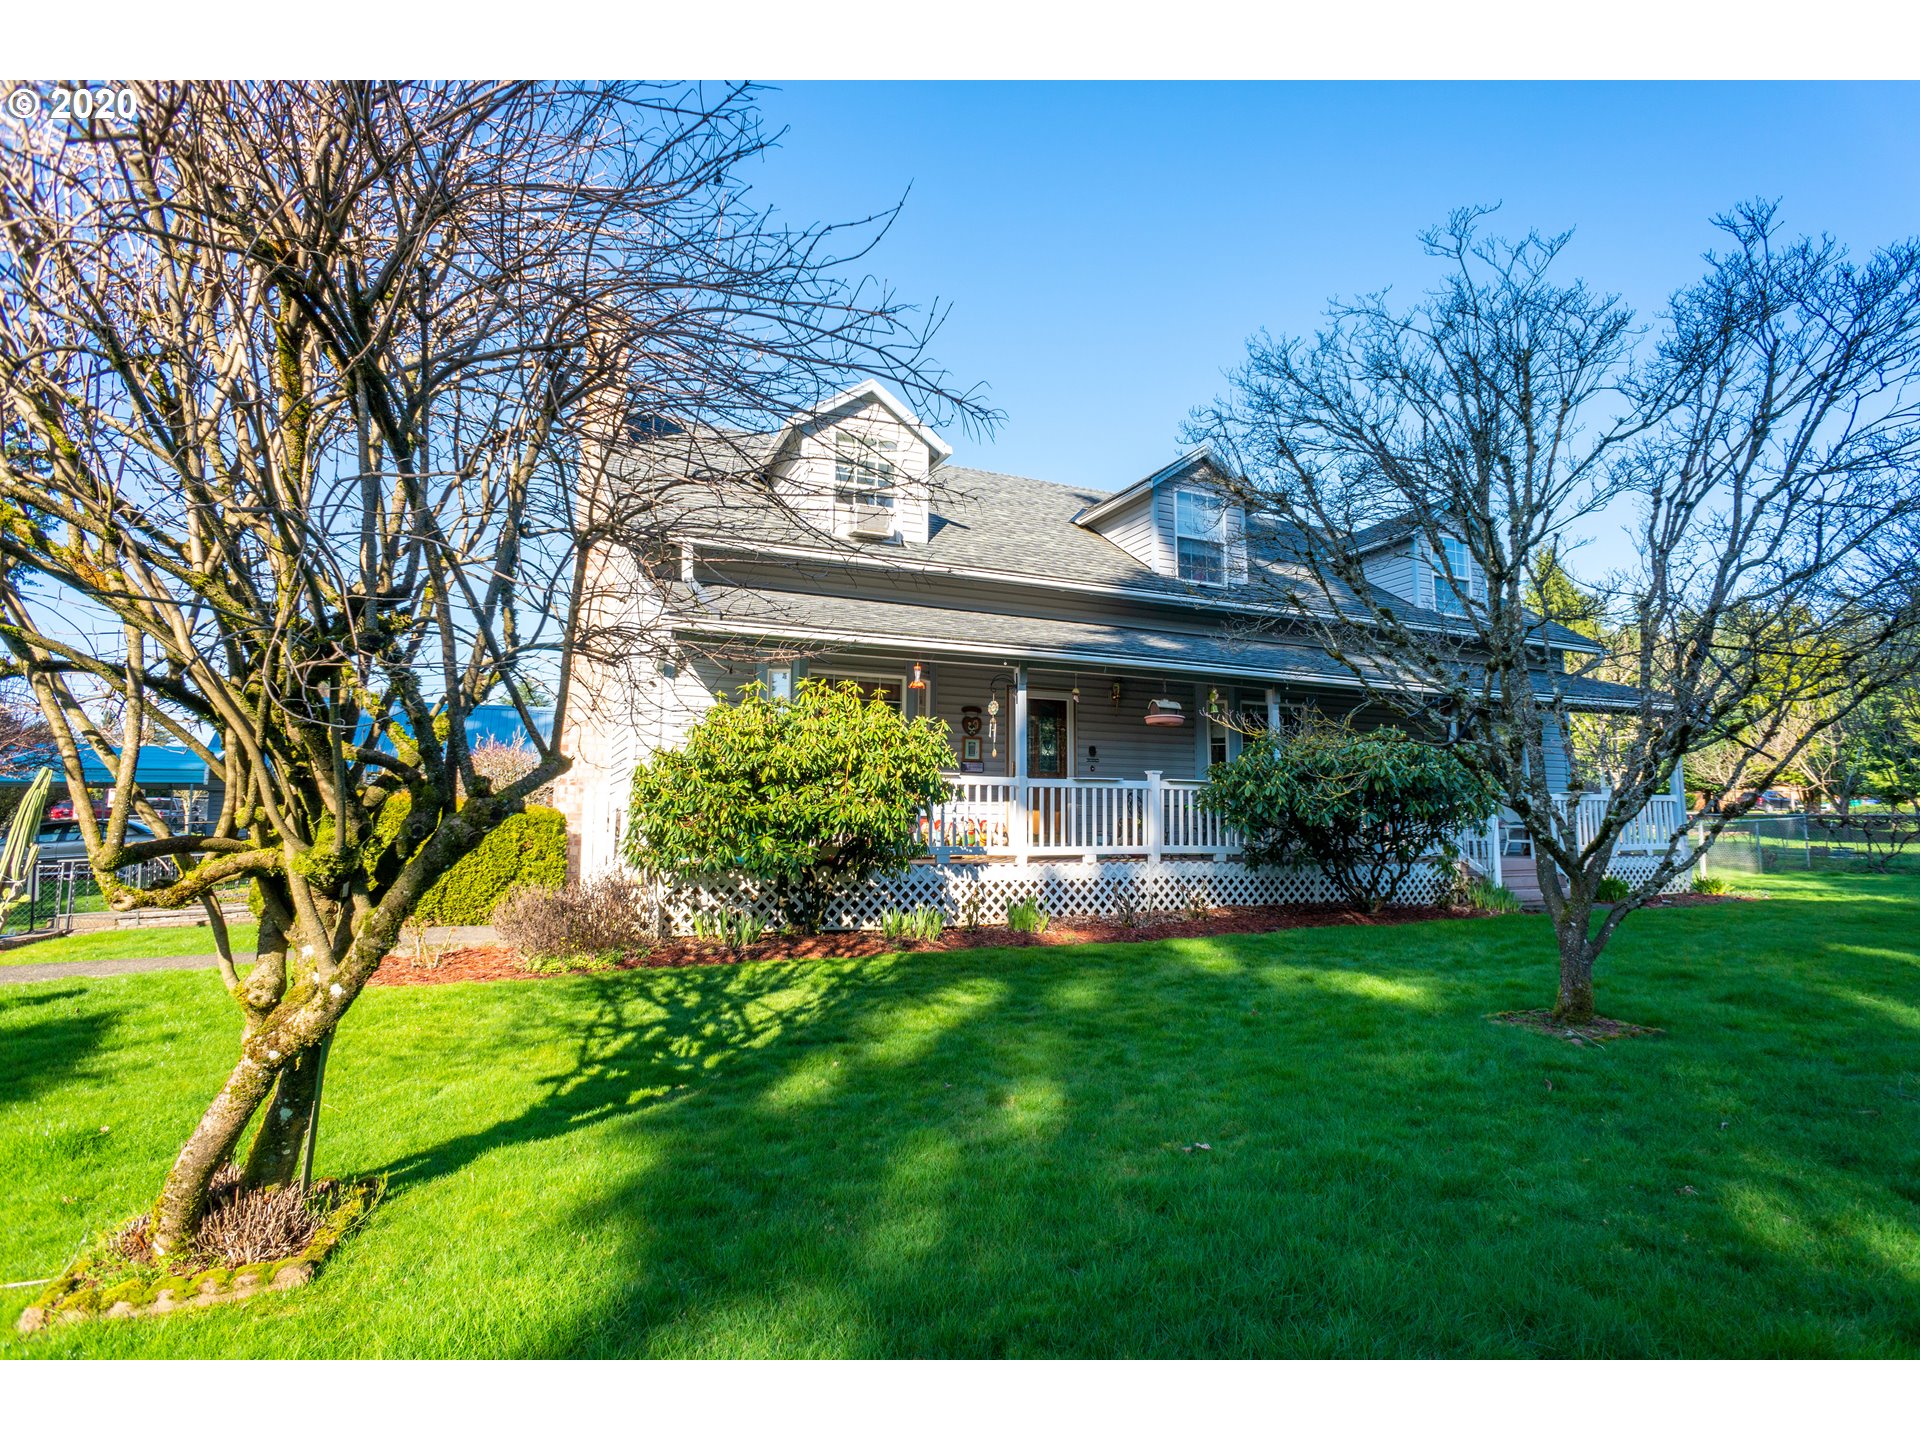 5500 SE 139TH AVE (1 of 25)